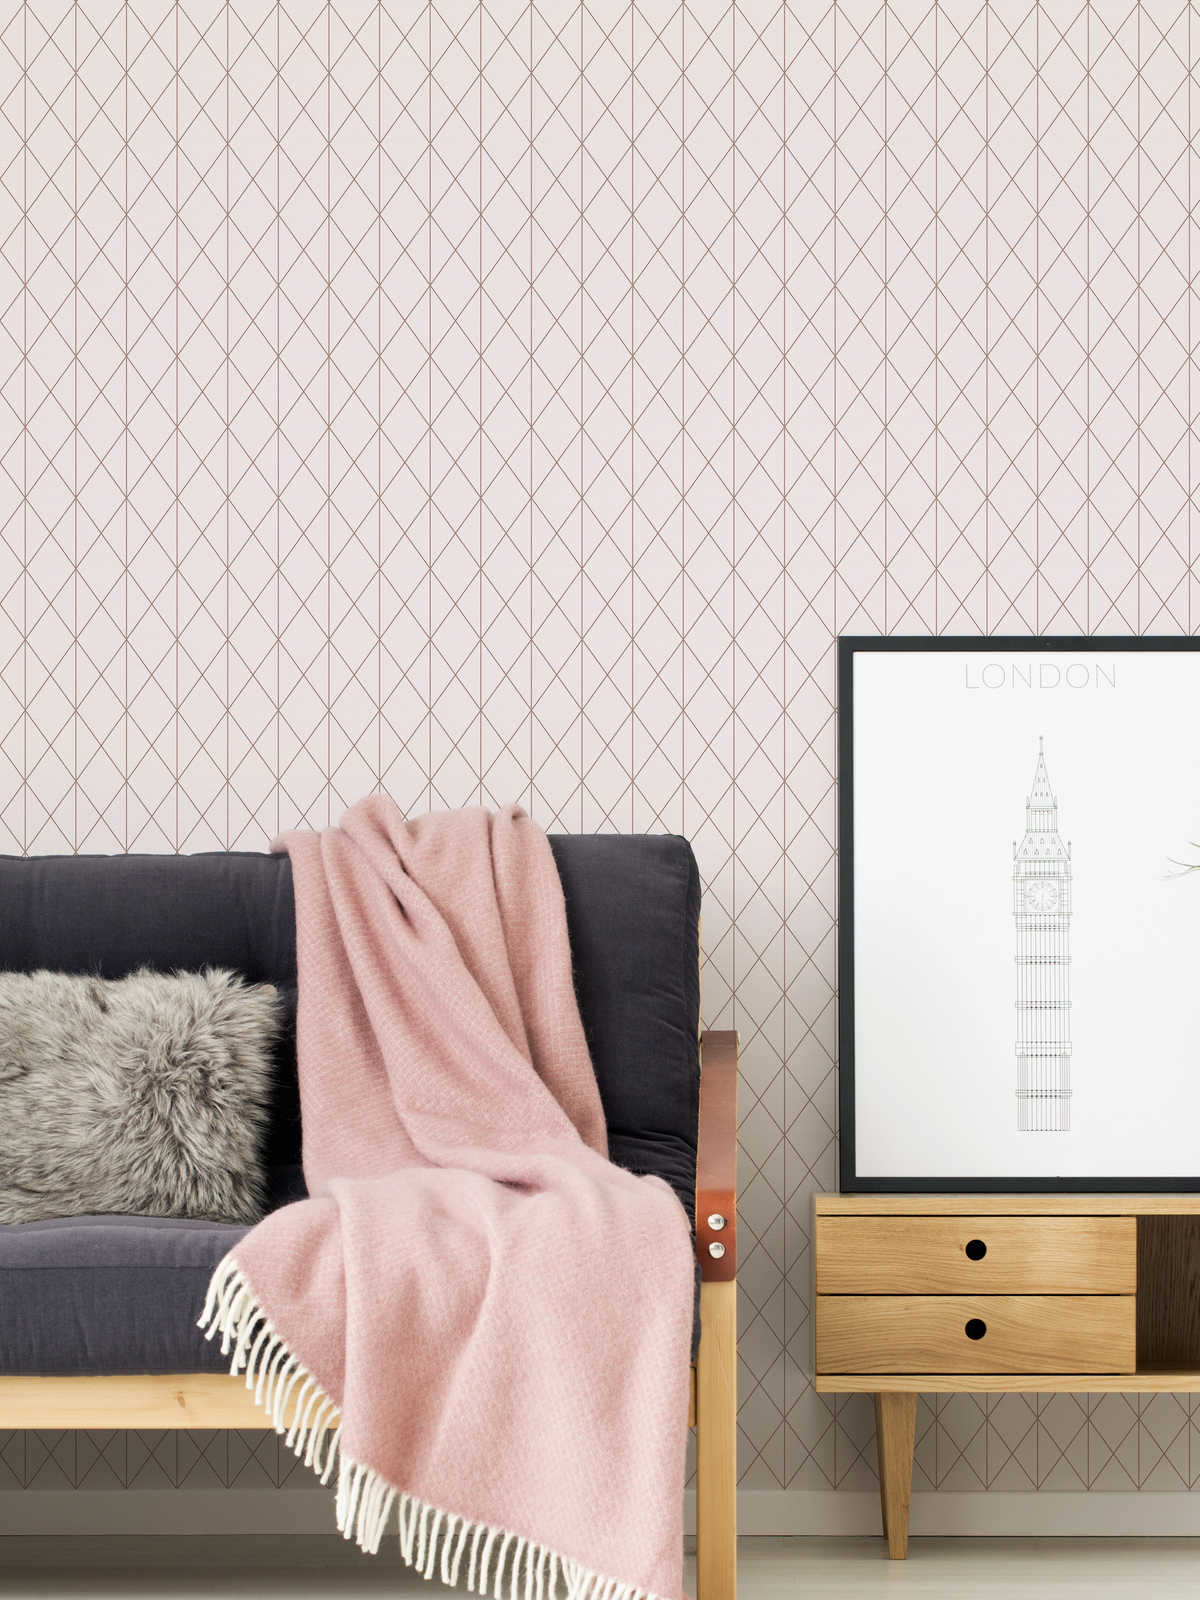             Graphic design wallpaper with metallic accent - pink
        